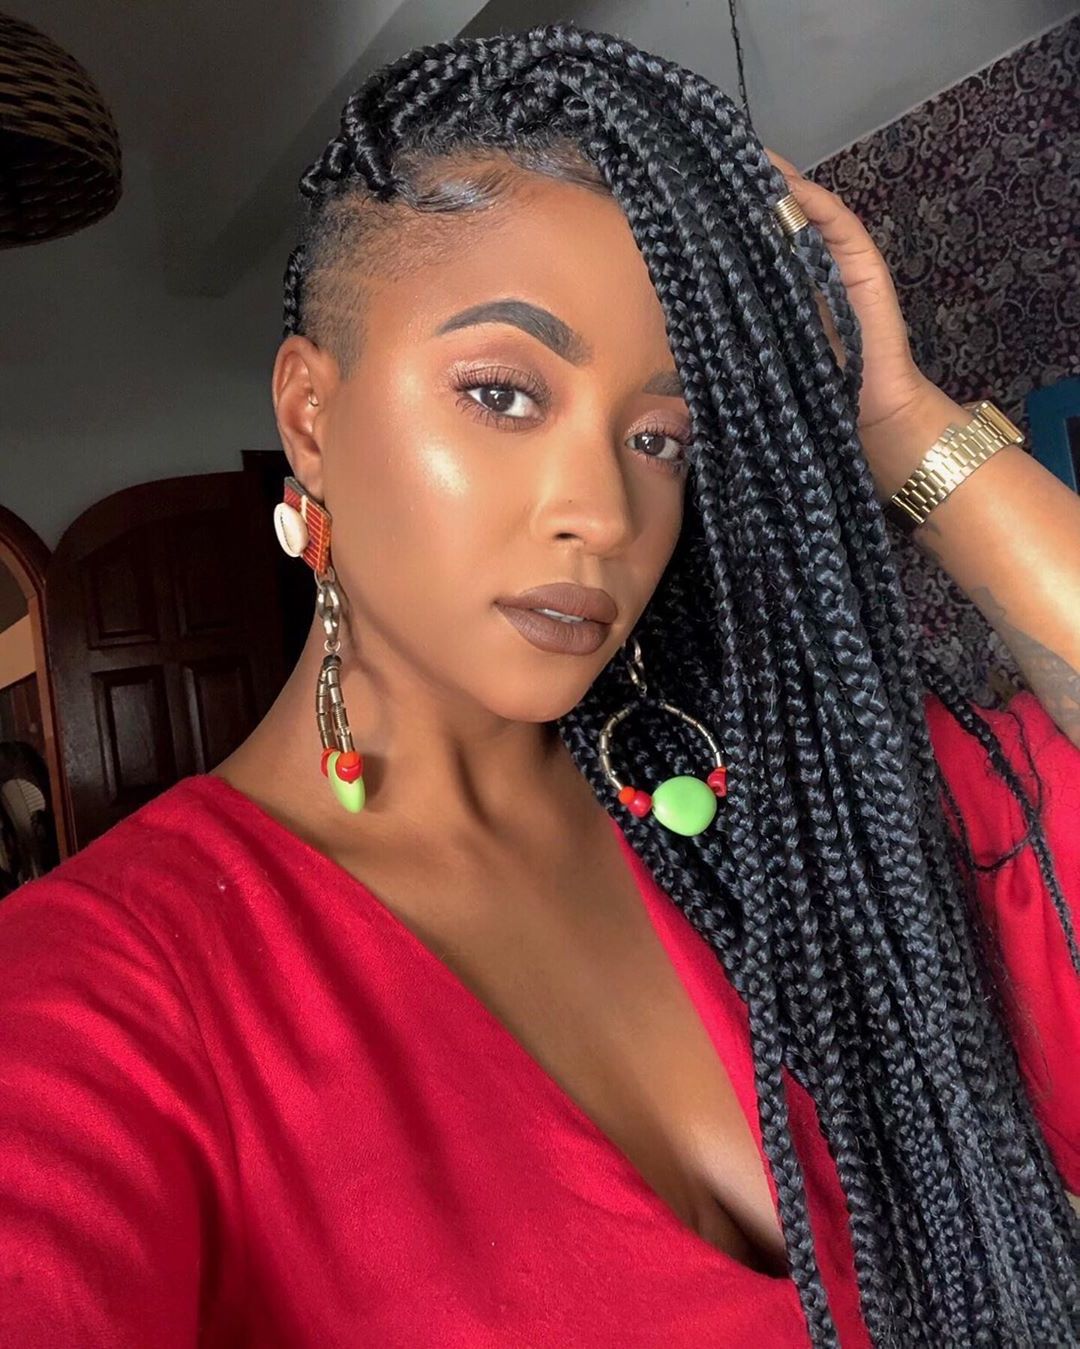 Popular Side Shaved Cornrows Braids Hairstyles With Box Braids With Shaved Sides: 21 Stylish Ways To Rock The Look (Gallery 19 of 21)